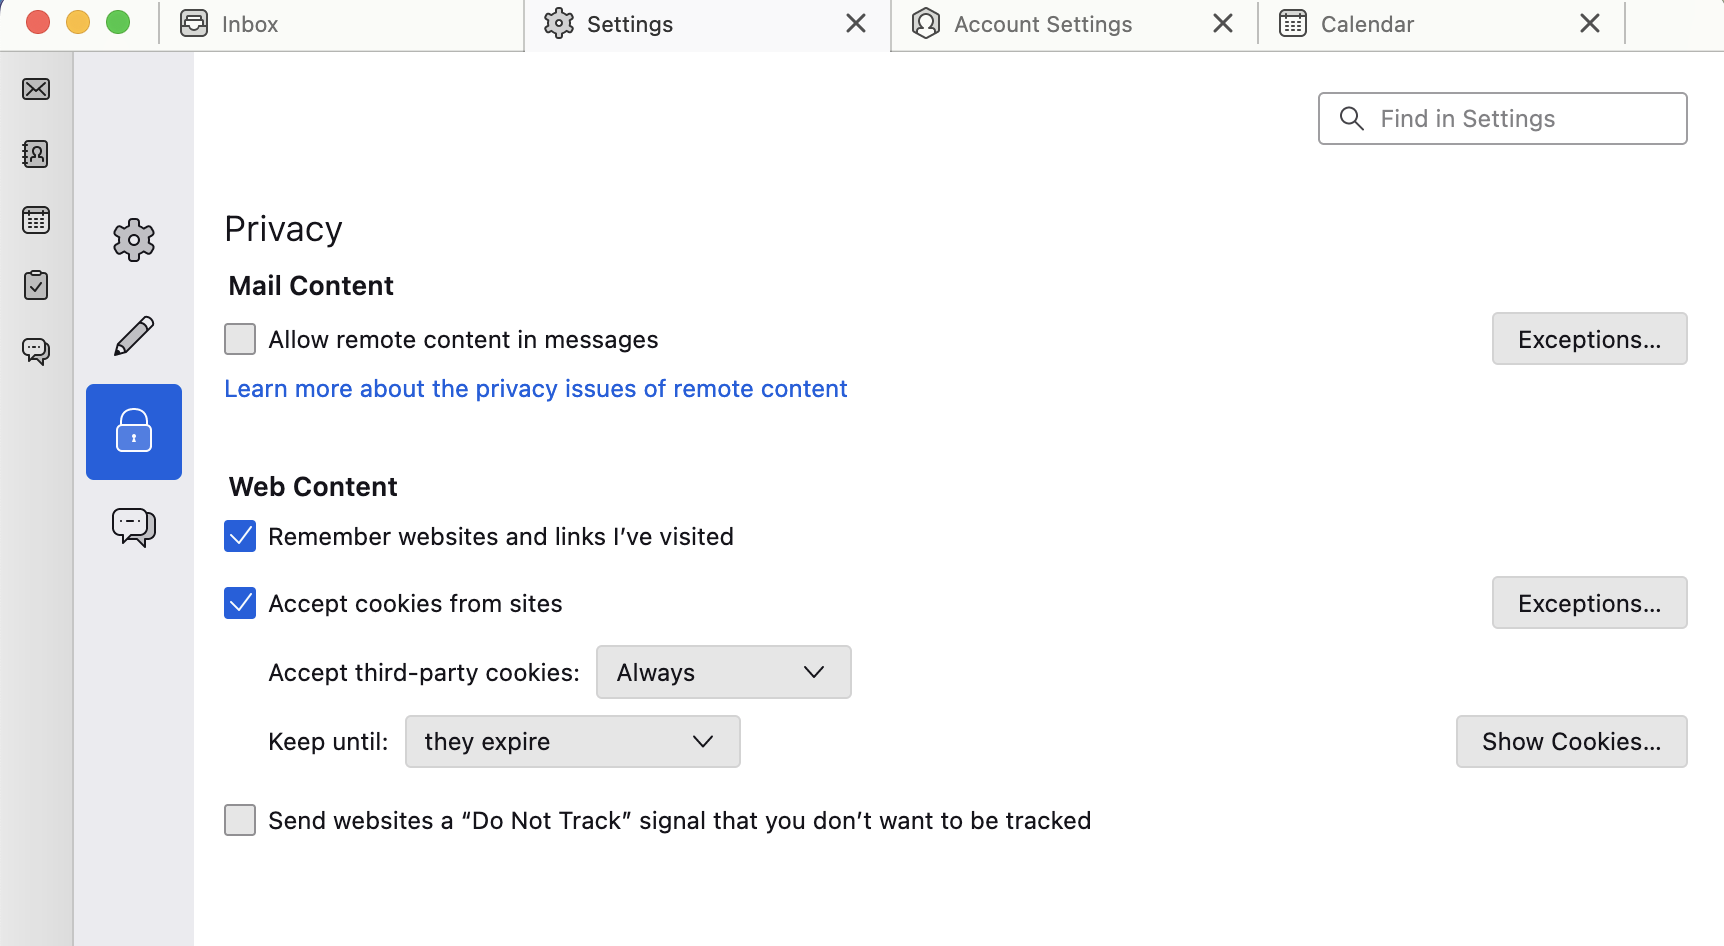 Privacy settings shown with the Web Content settings set as described in the written instructions.